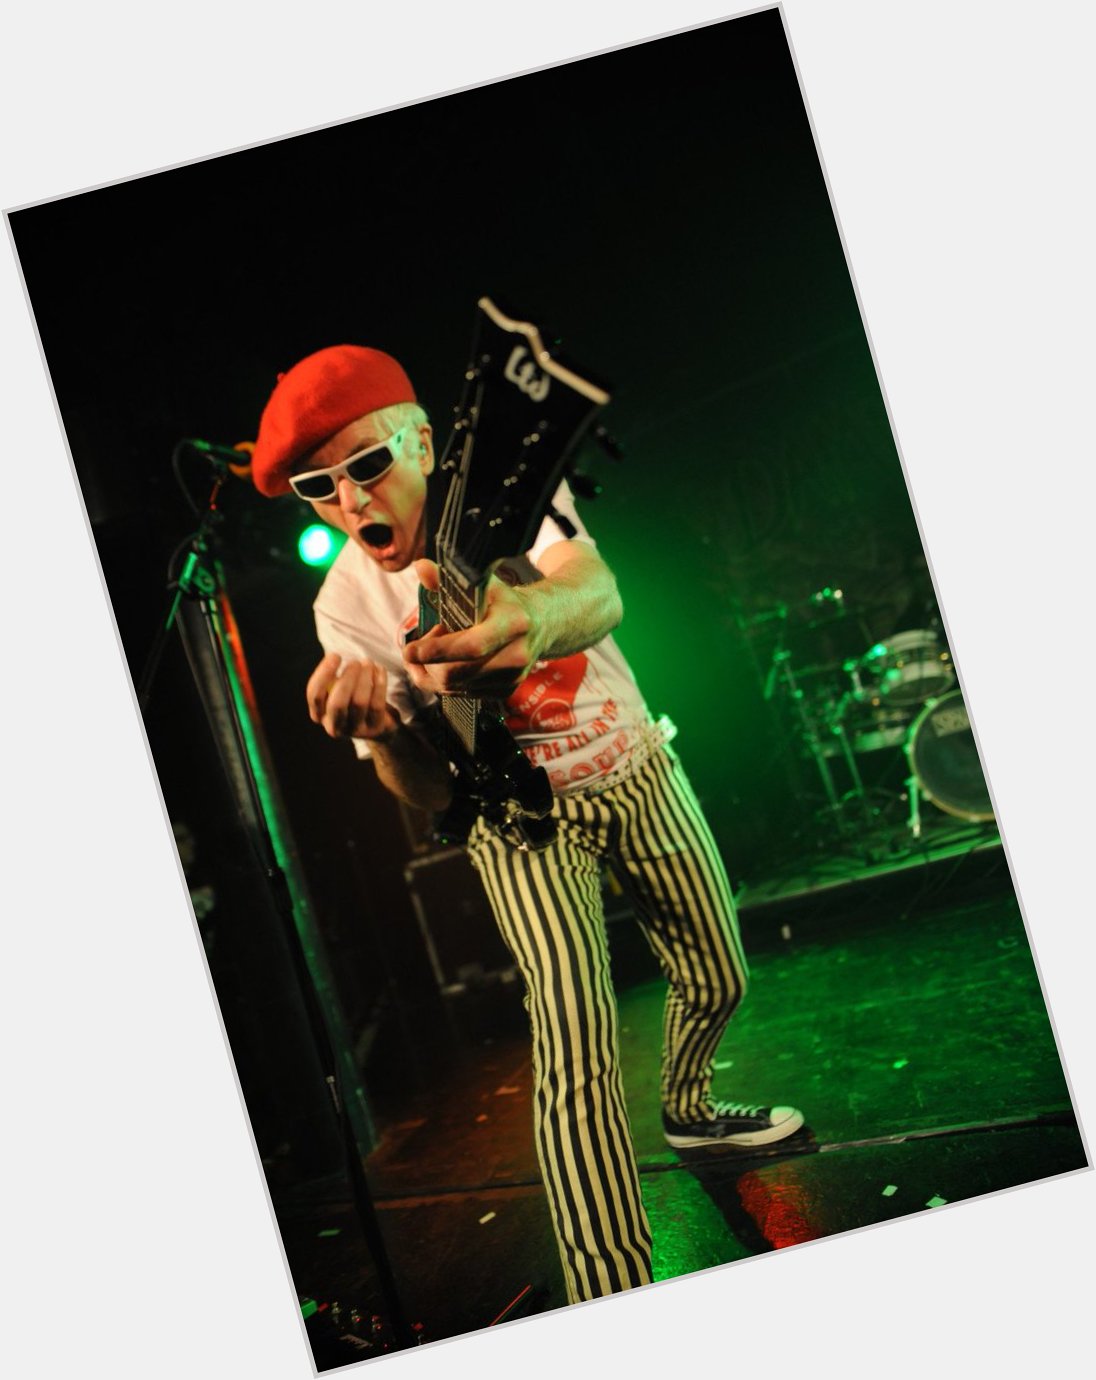 Happy Birthday Captain Sensible ( of The Damned ( from all of us at VZ HQ! 